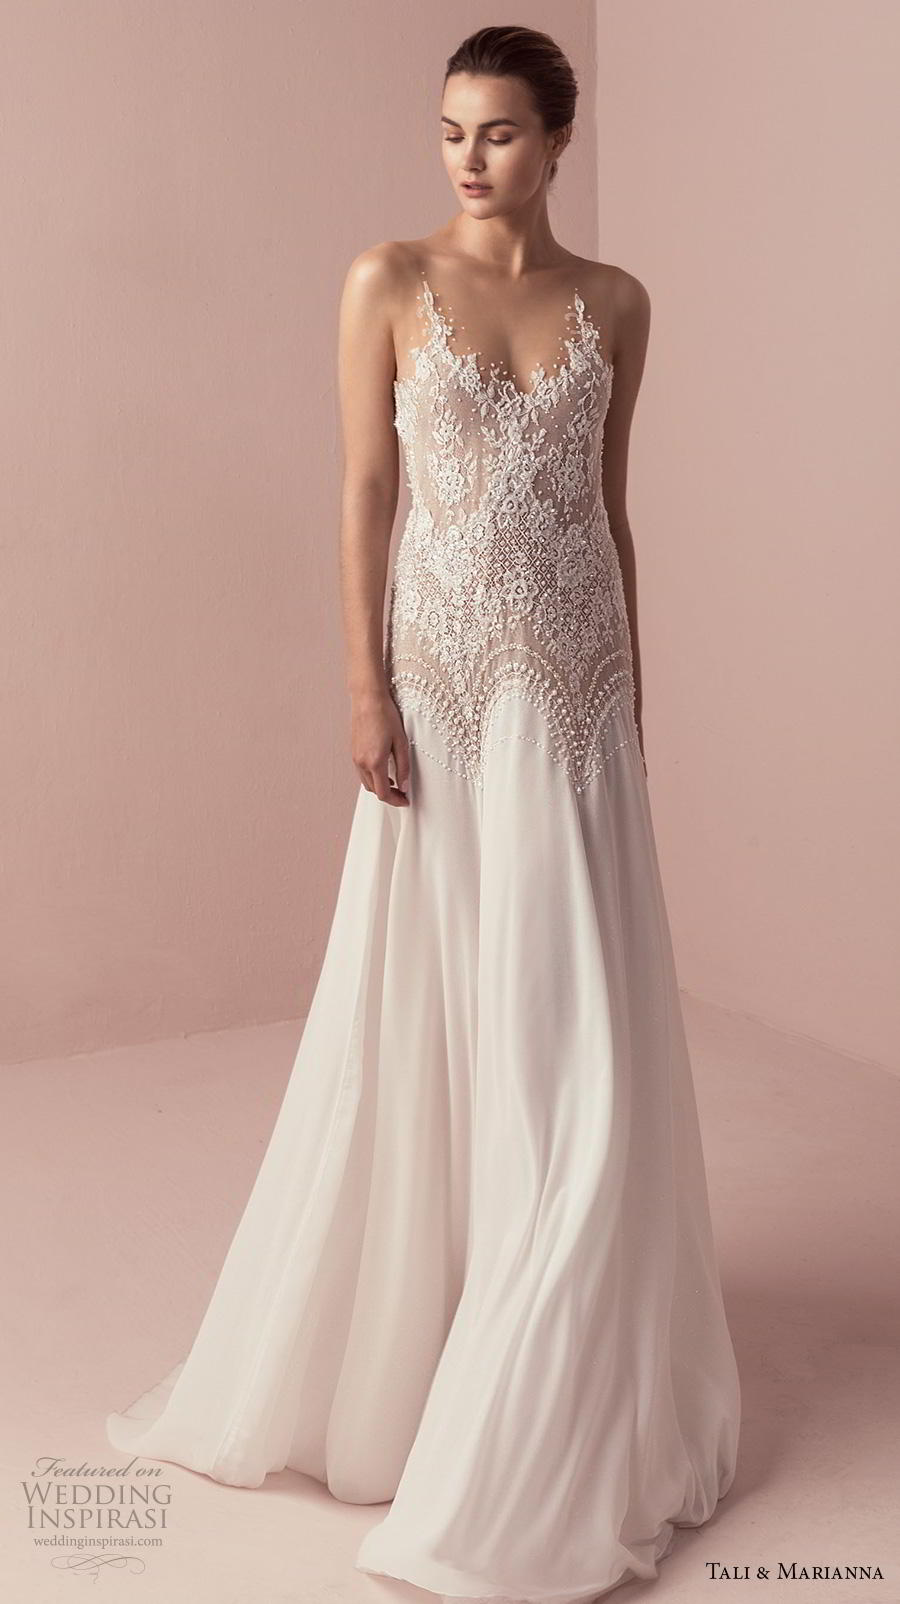 Tali & Marianna 2018 Wedding Dresses — “The One” Bridal Collection ...